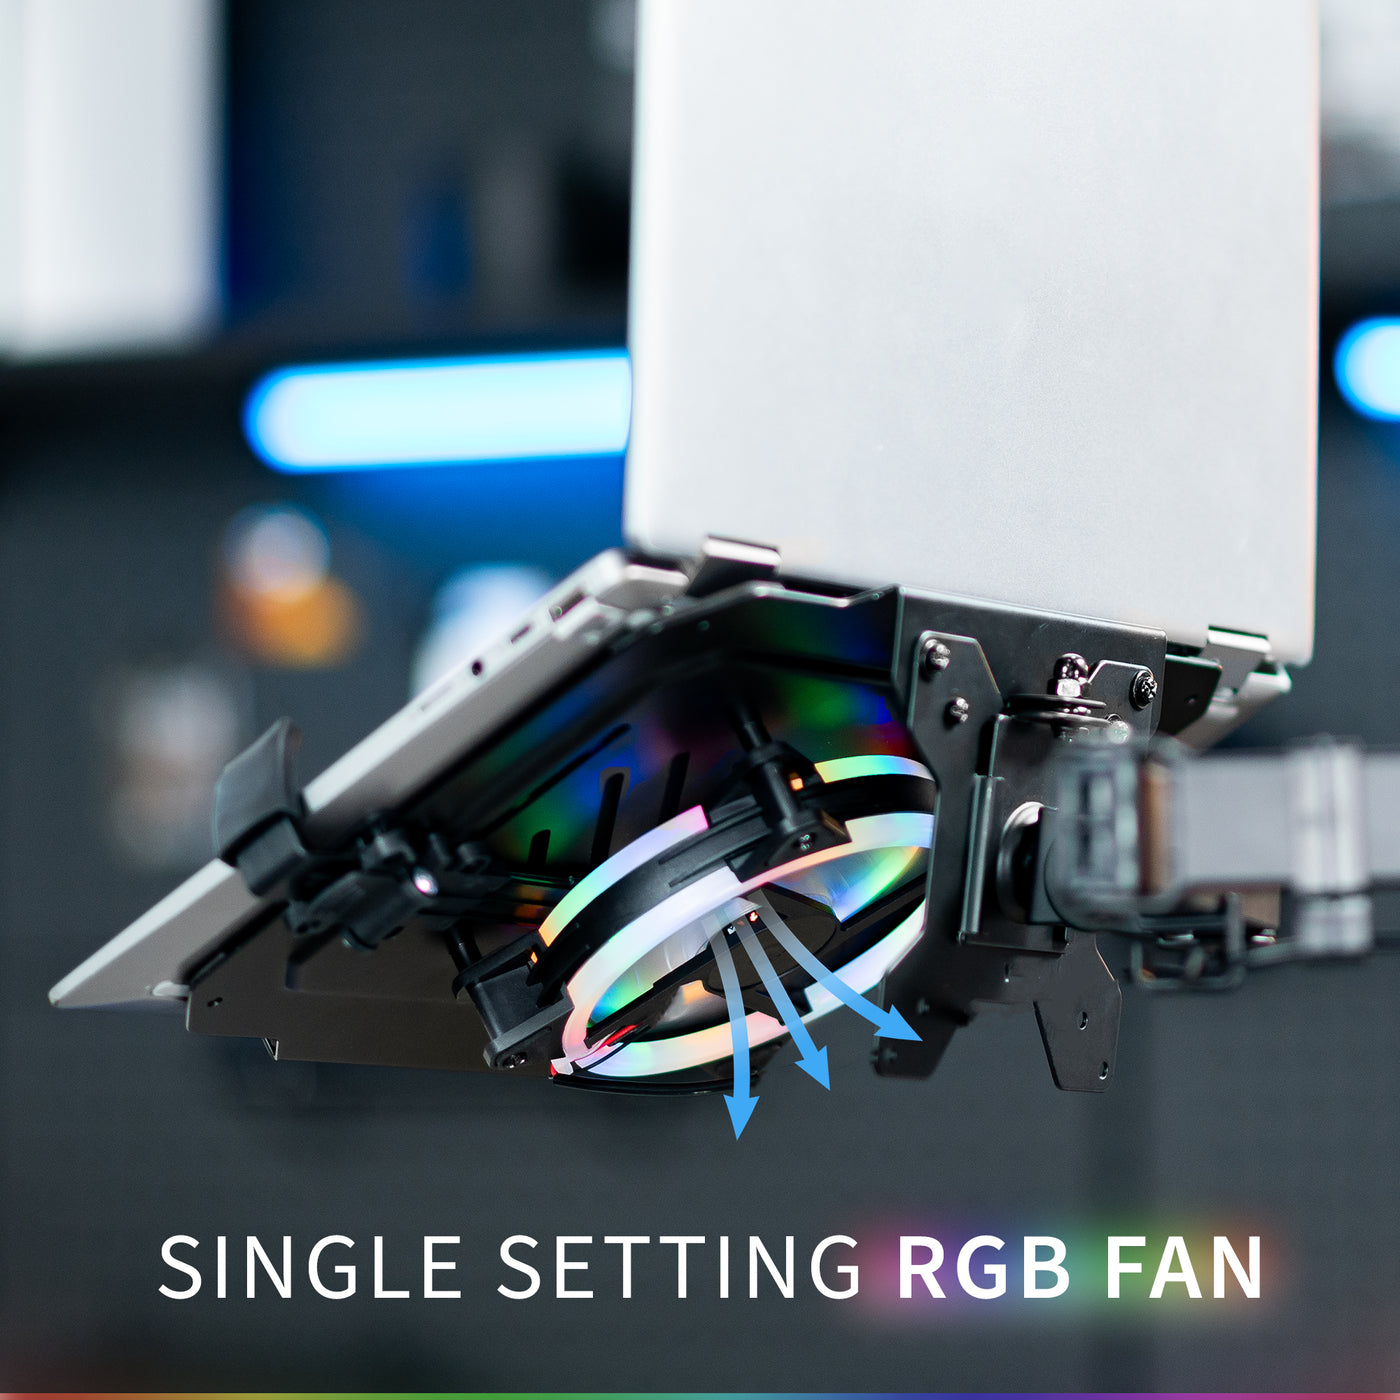 VESA compatible laptop tray with RGB fan adds colorful ambience.